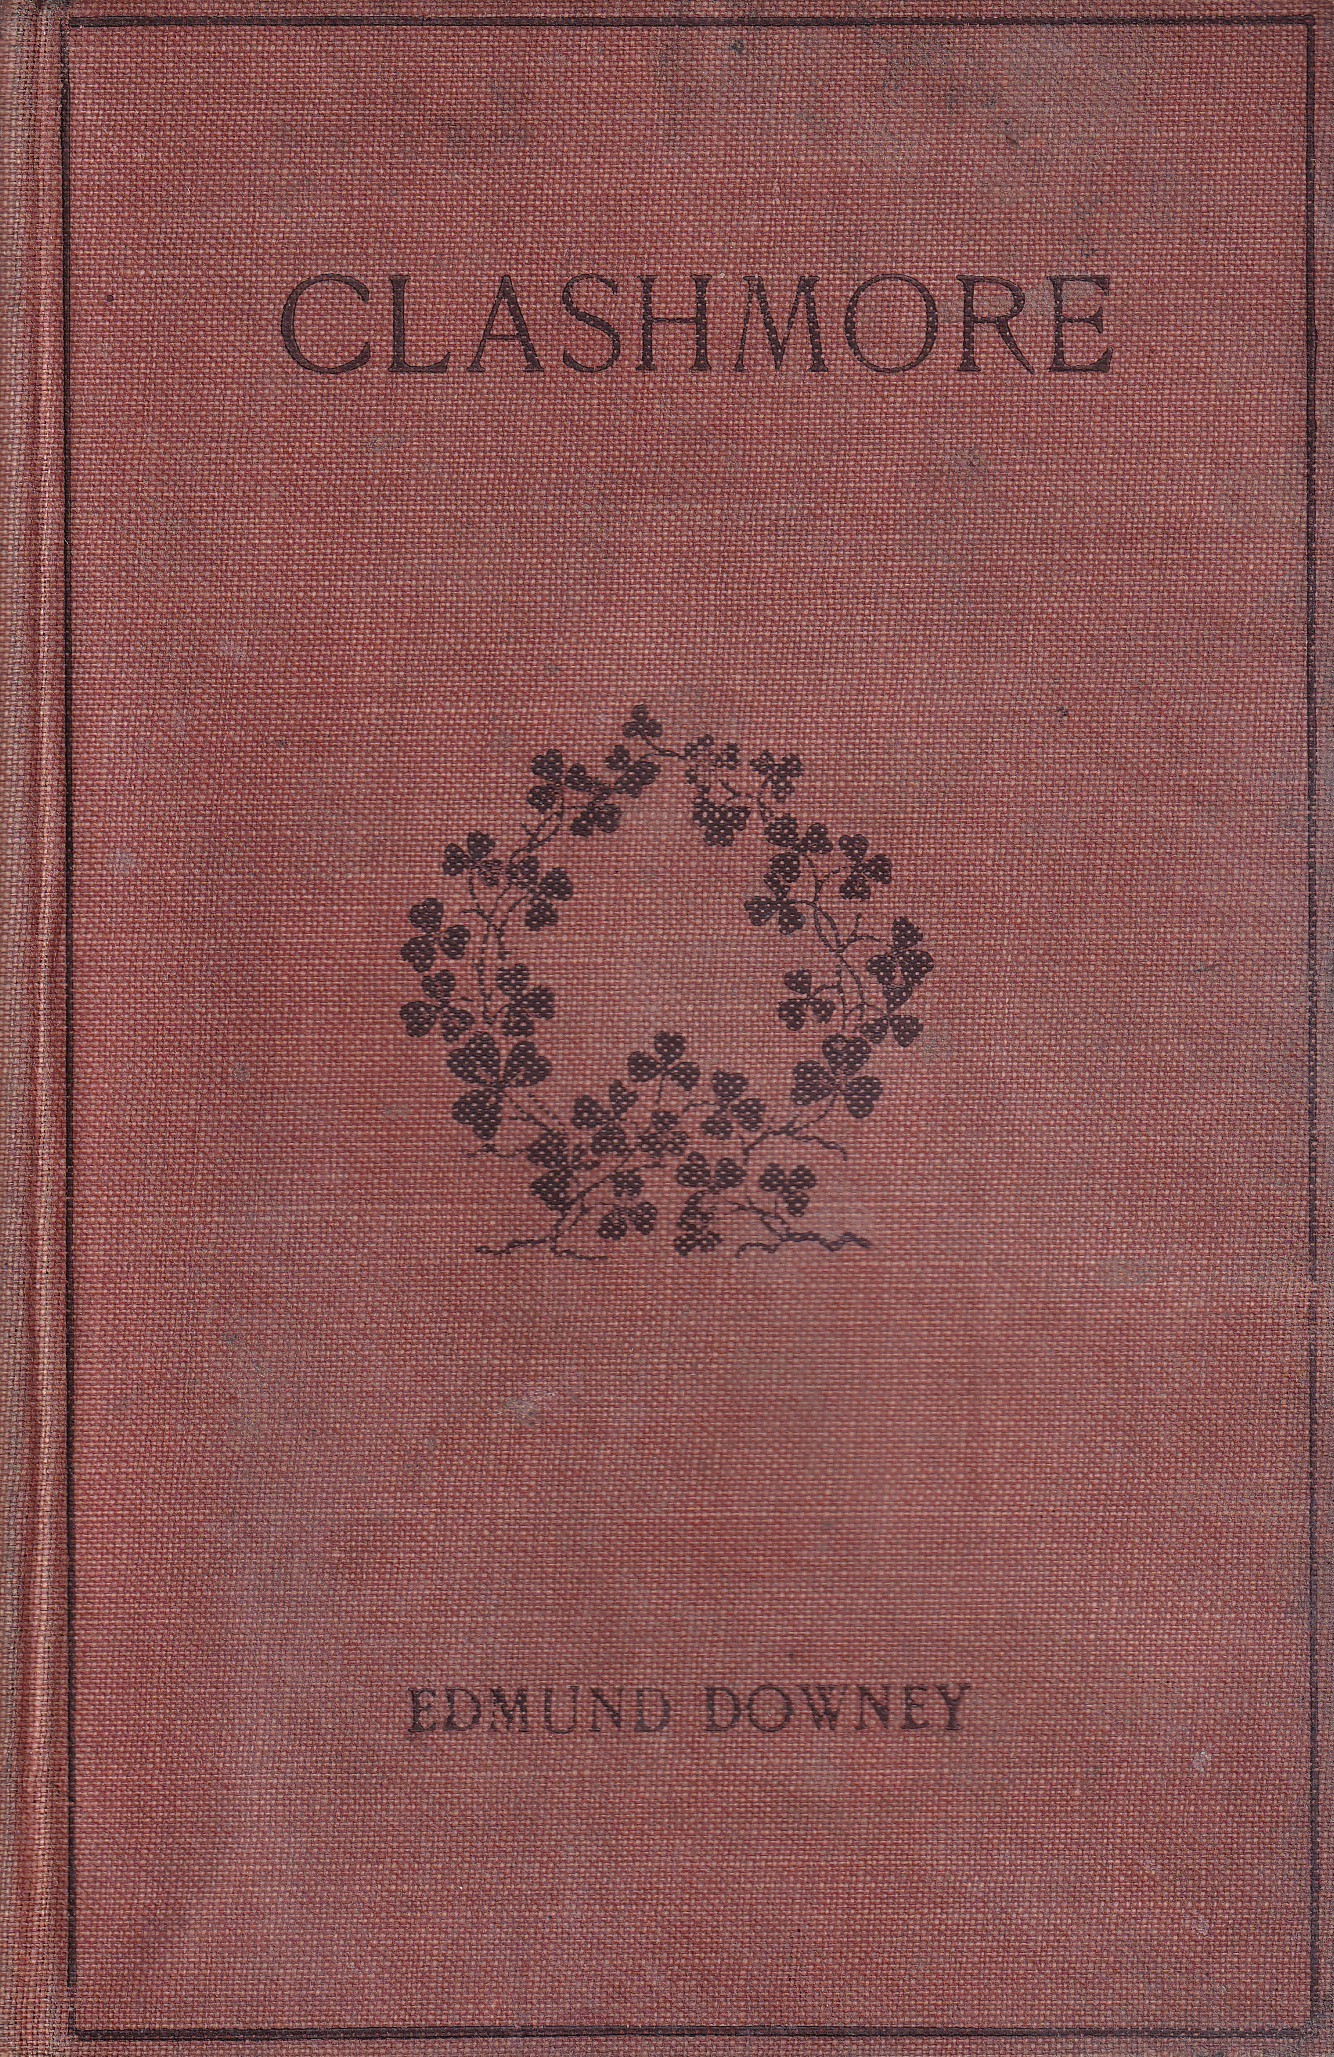 Clashmore by Edmund Downey